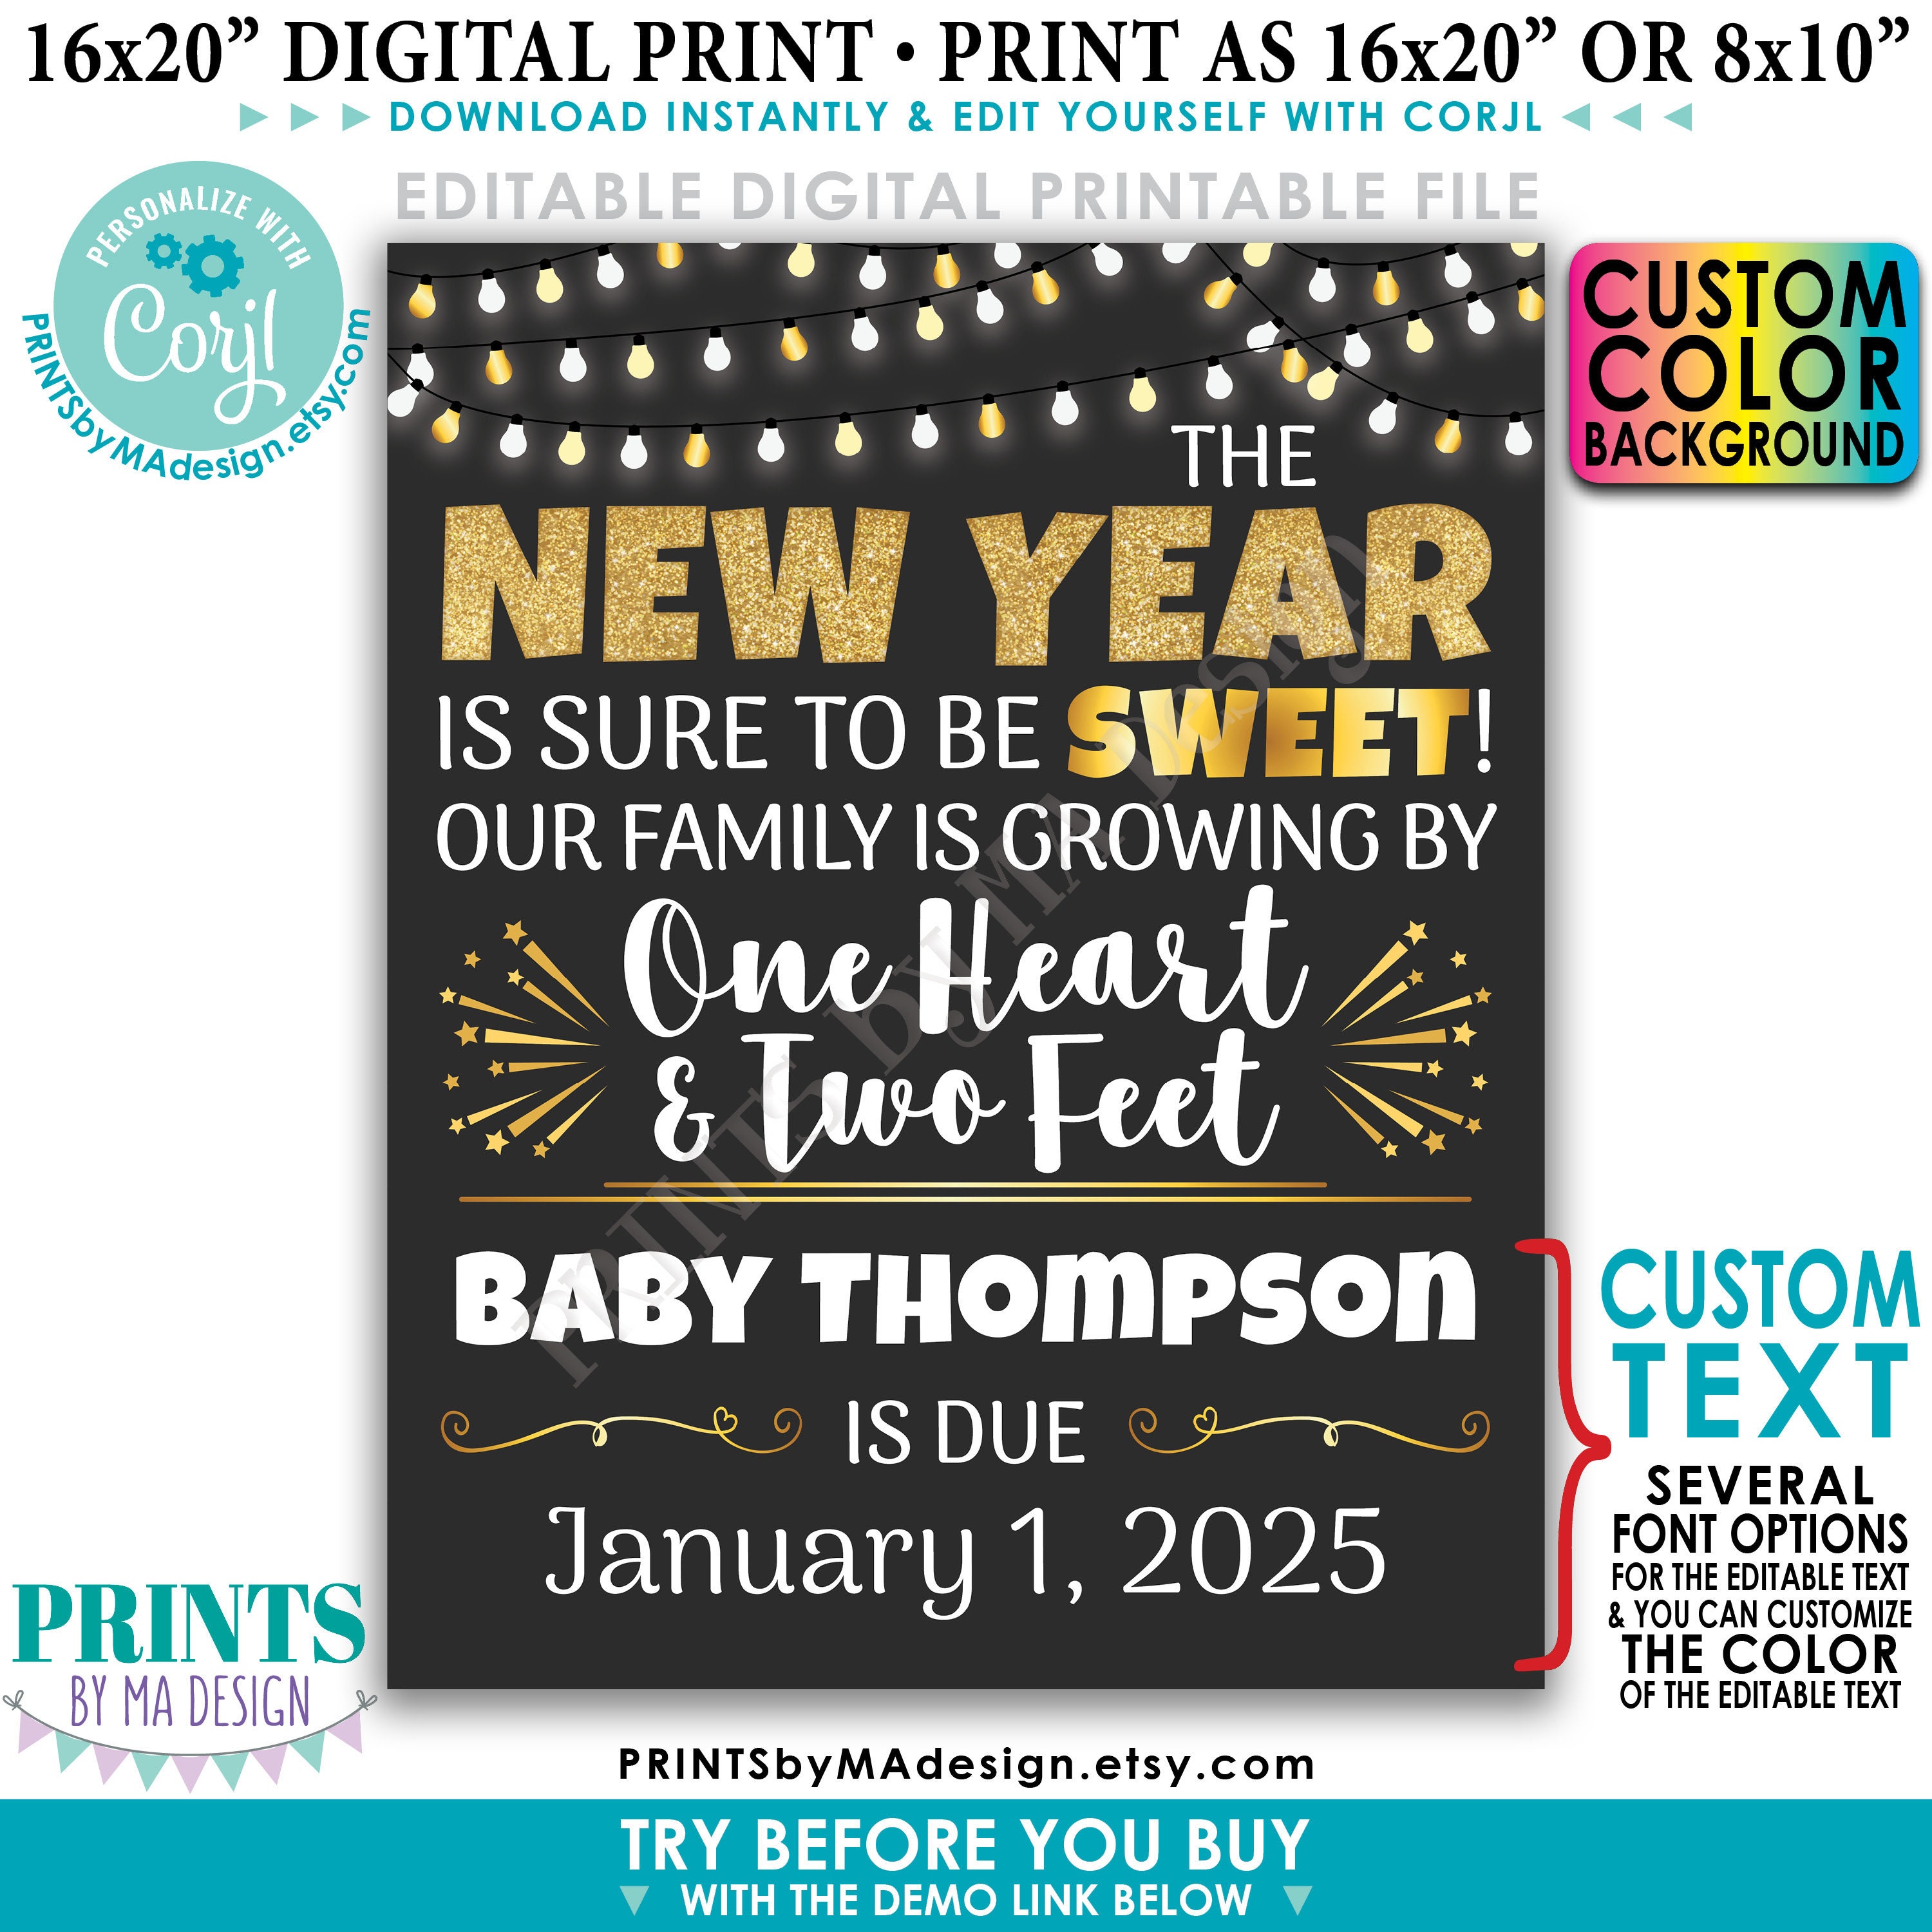 editable-new-years-pregnancy-announcement-our-family-is-growing-by-1-heart-2-feet-printable